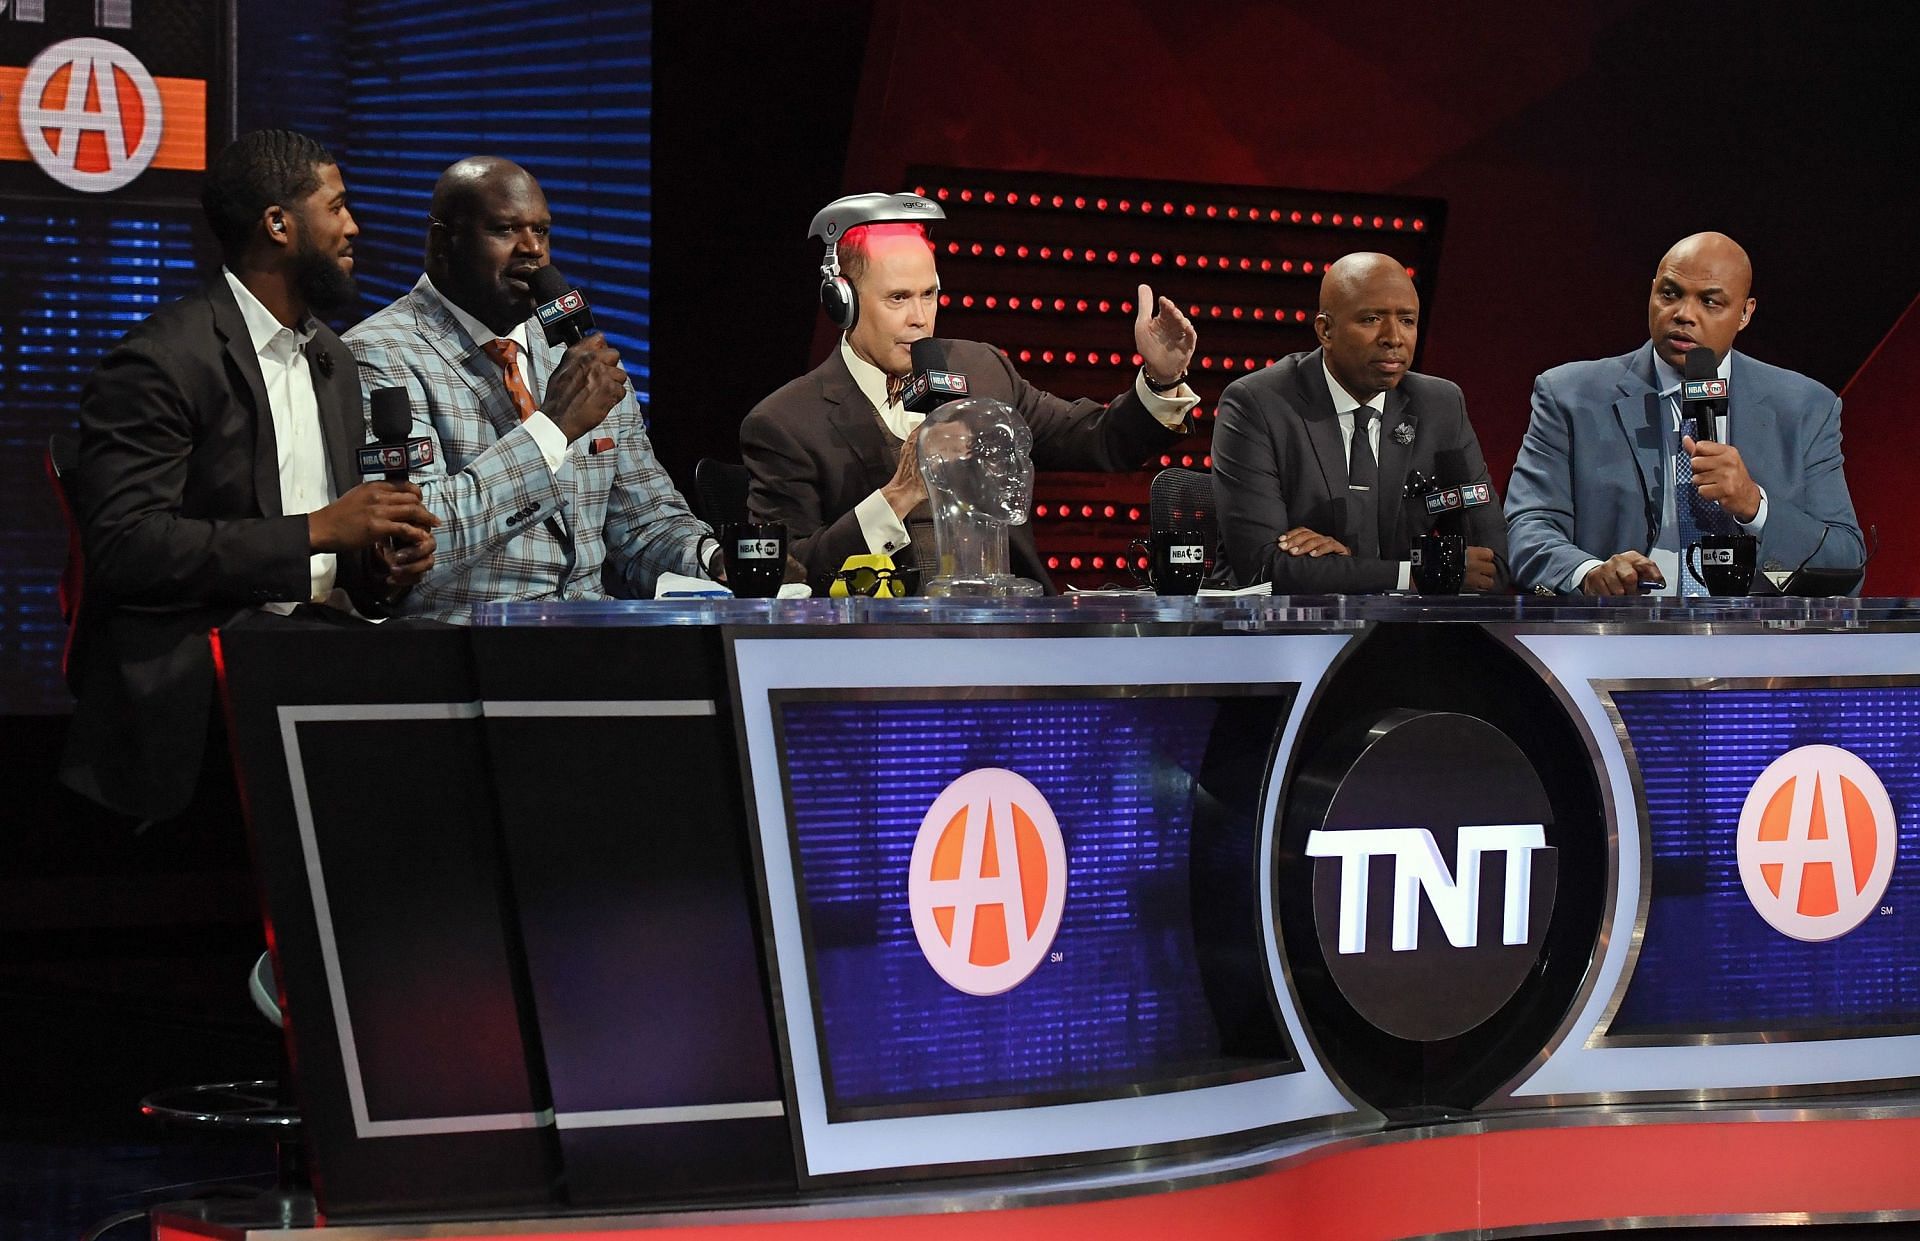 Shaq and Chuck are part of the show Inside the NBA